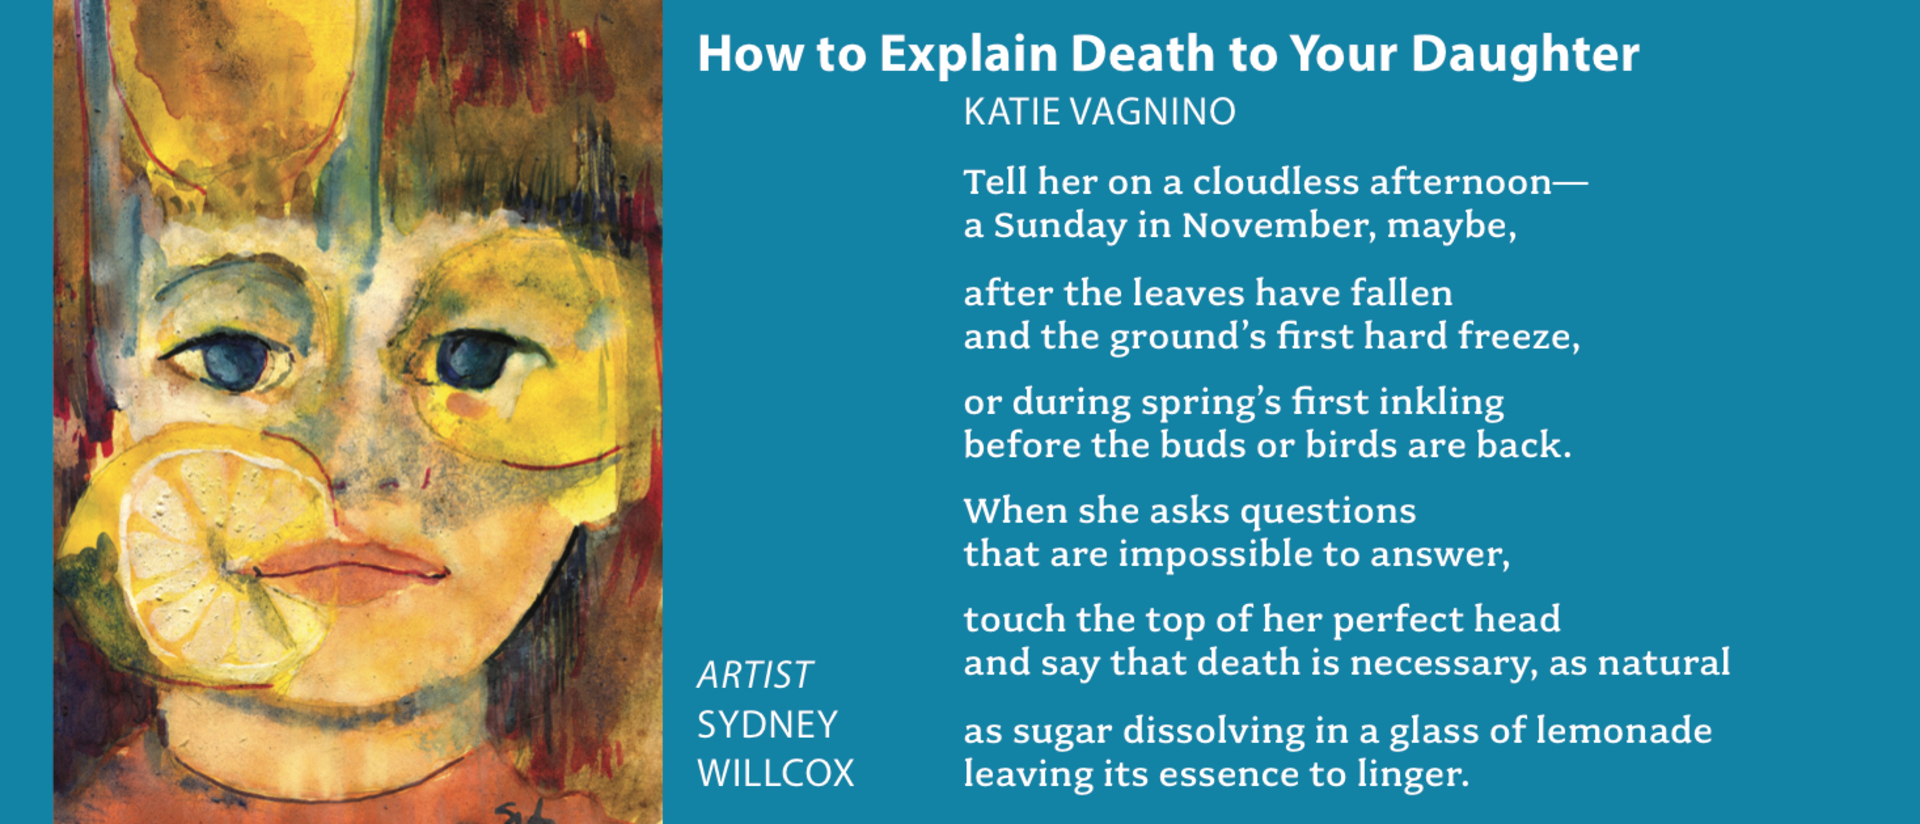 How to Explain Death to Your Daughter Poem